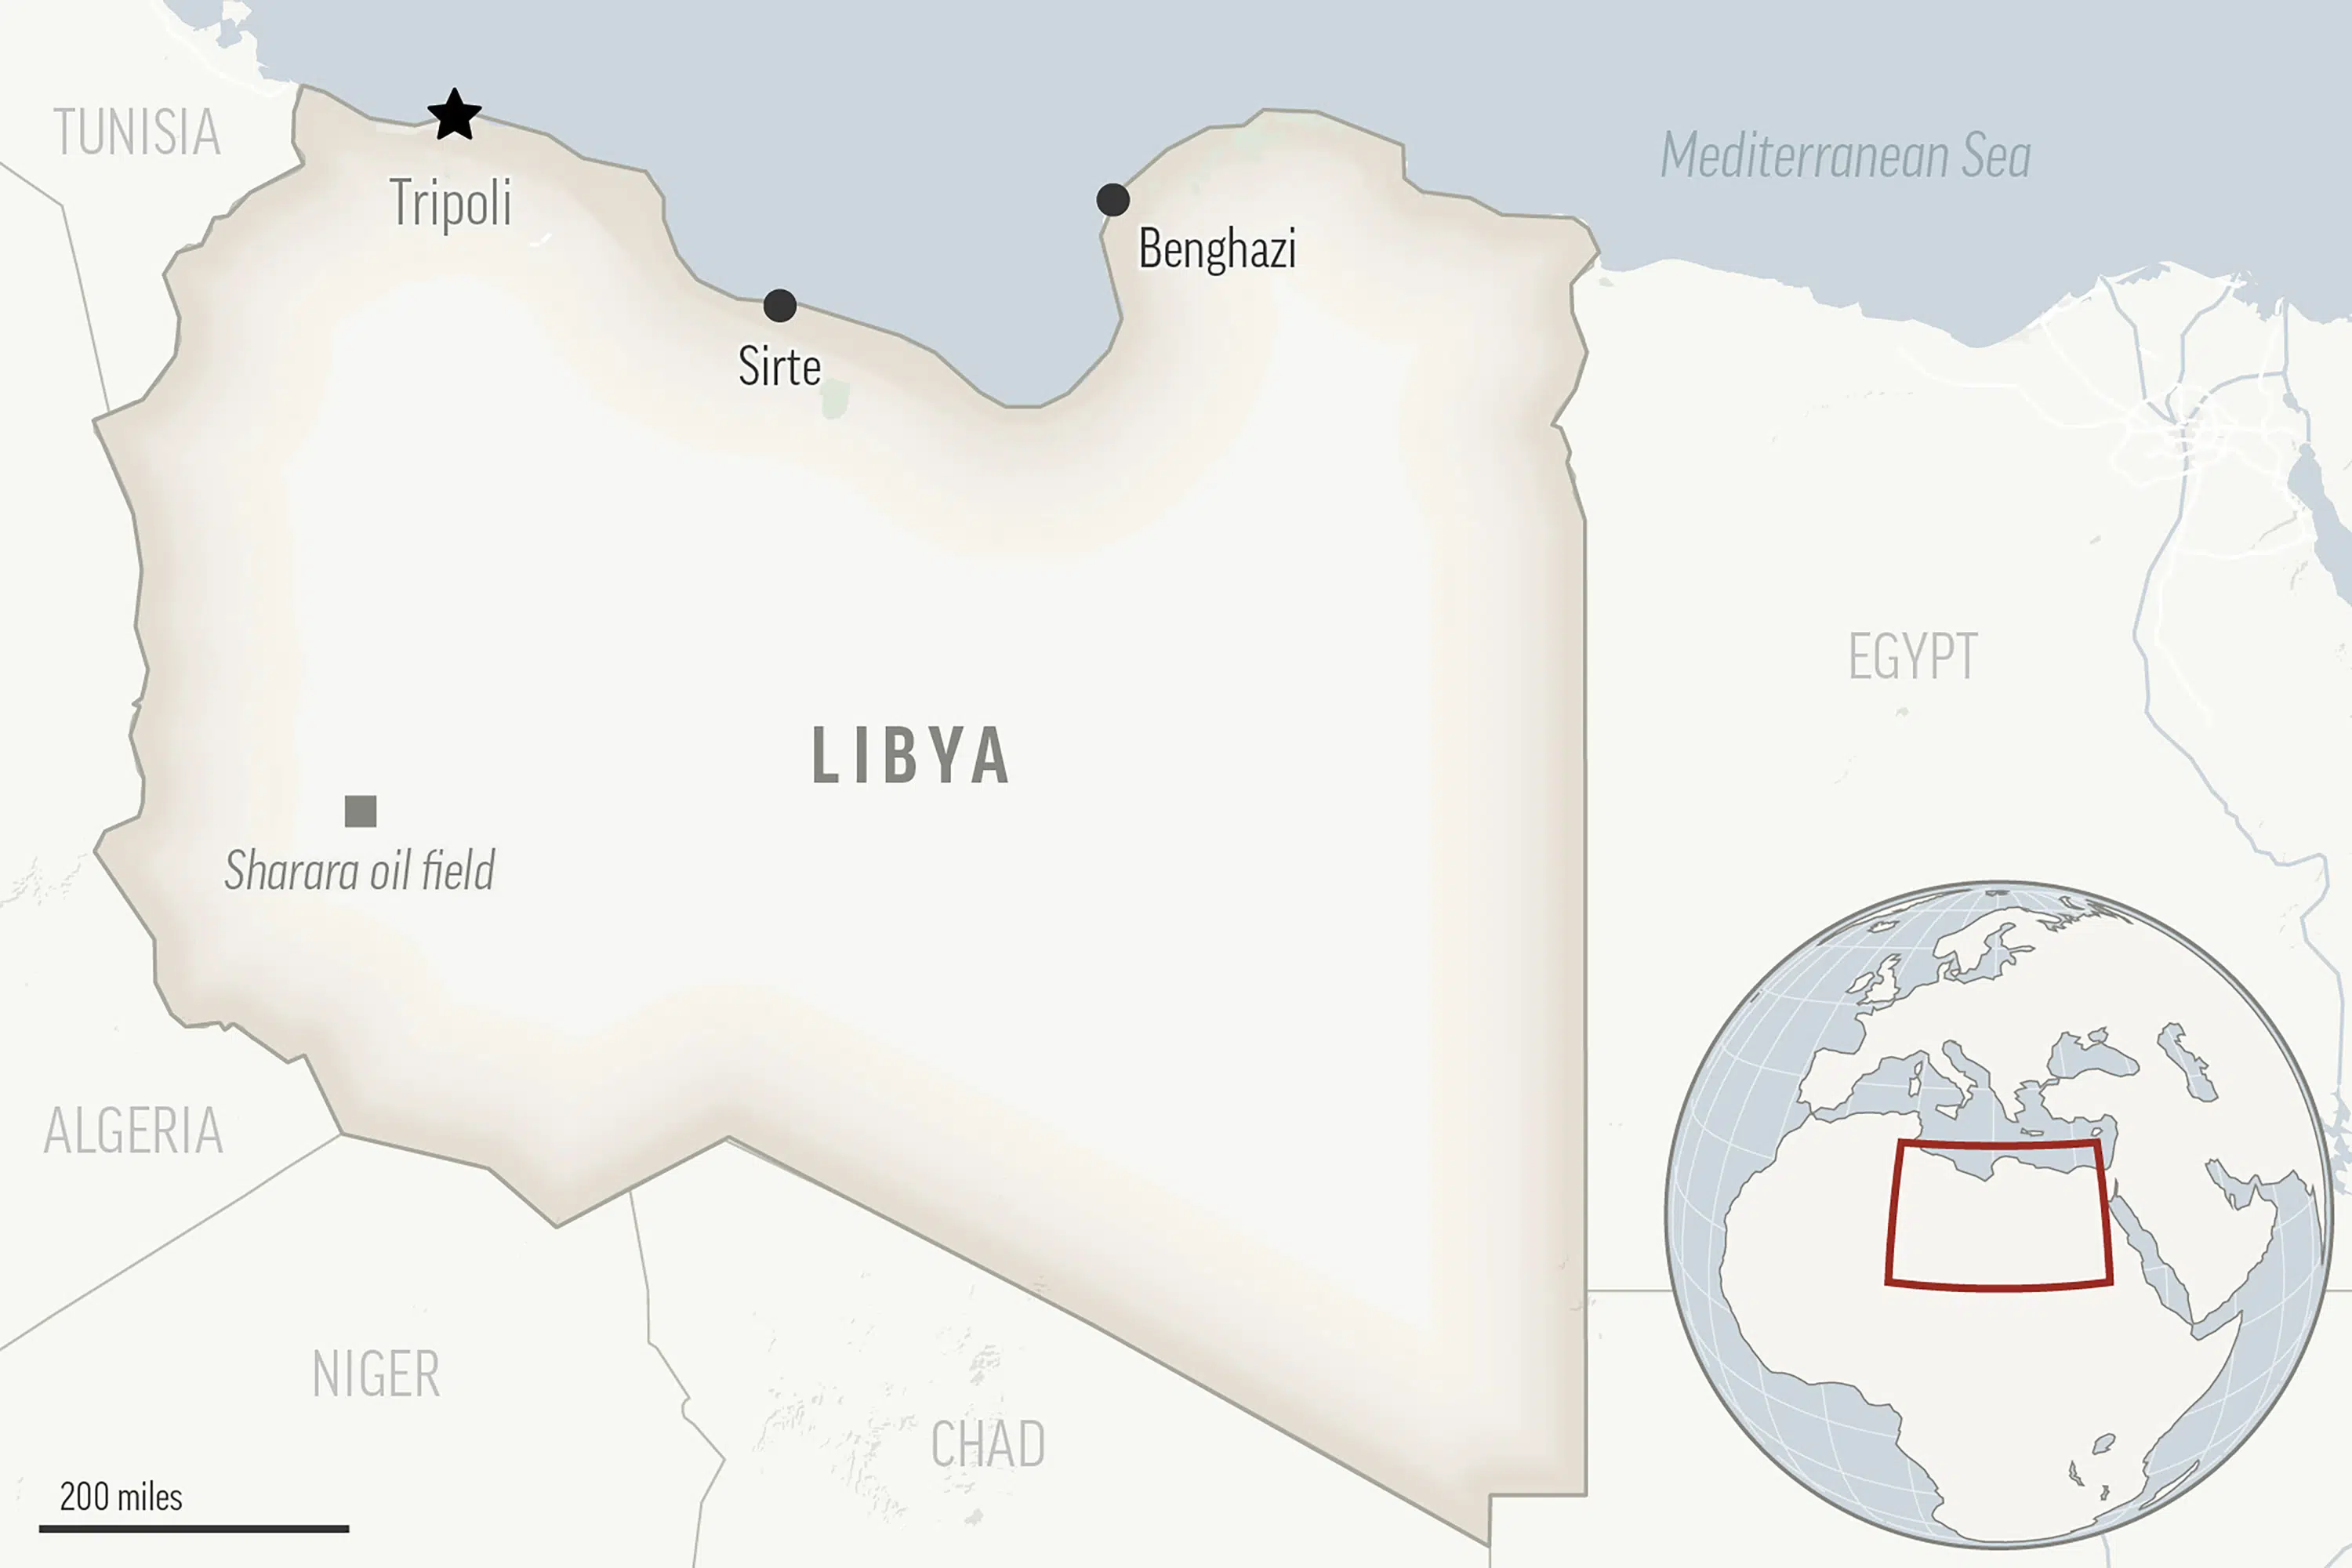 Libyan court sentences 23 suspected Islamic State militants to death